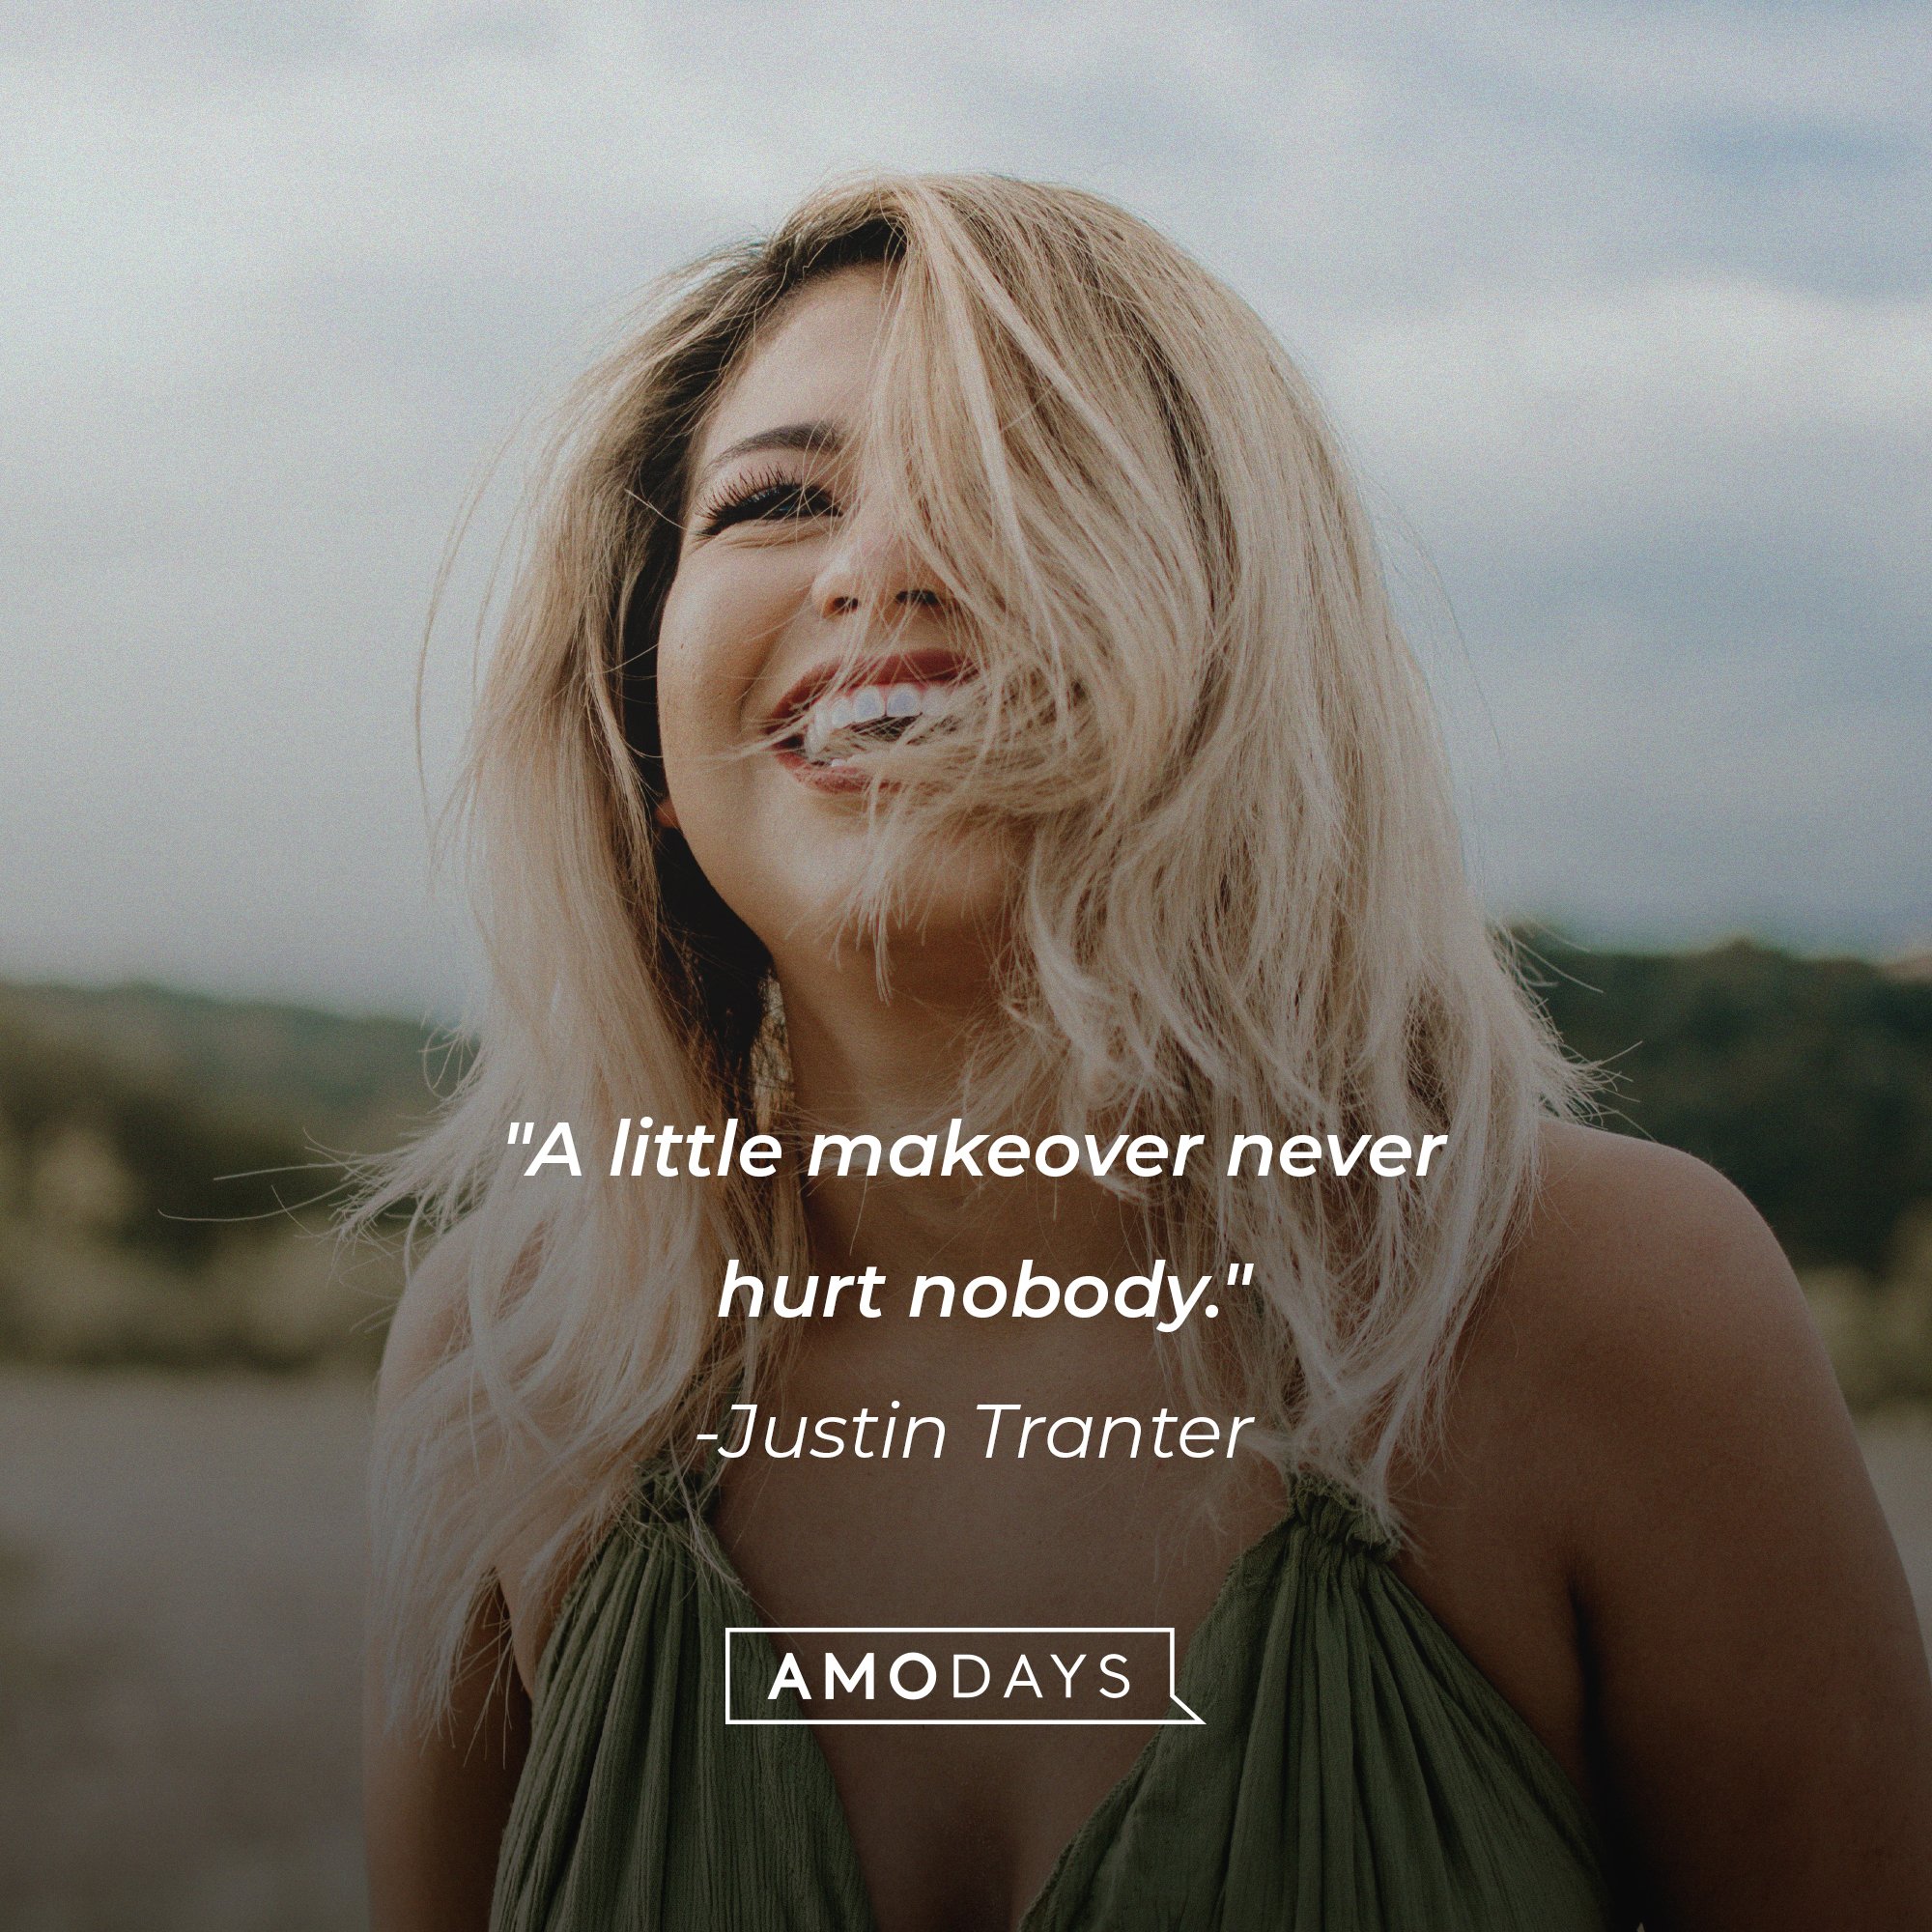 Justin Tranter’s quote: "A little makeover never hurt nobody." | Image: AmoDays 